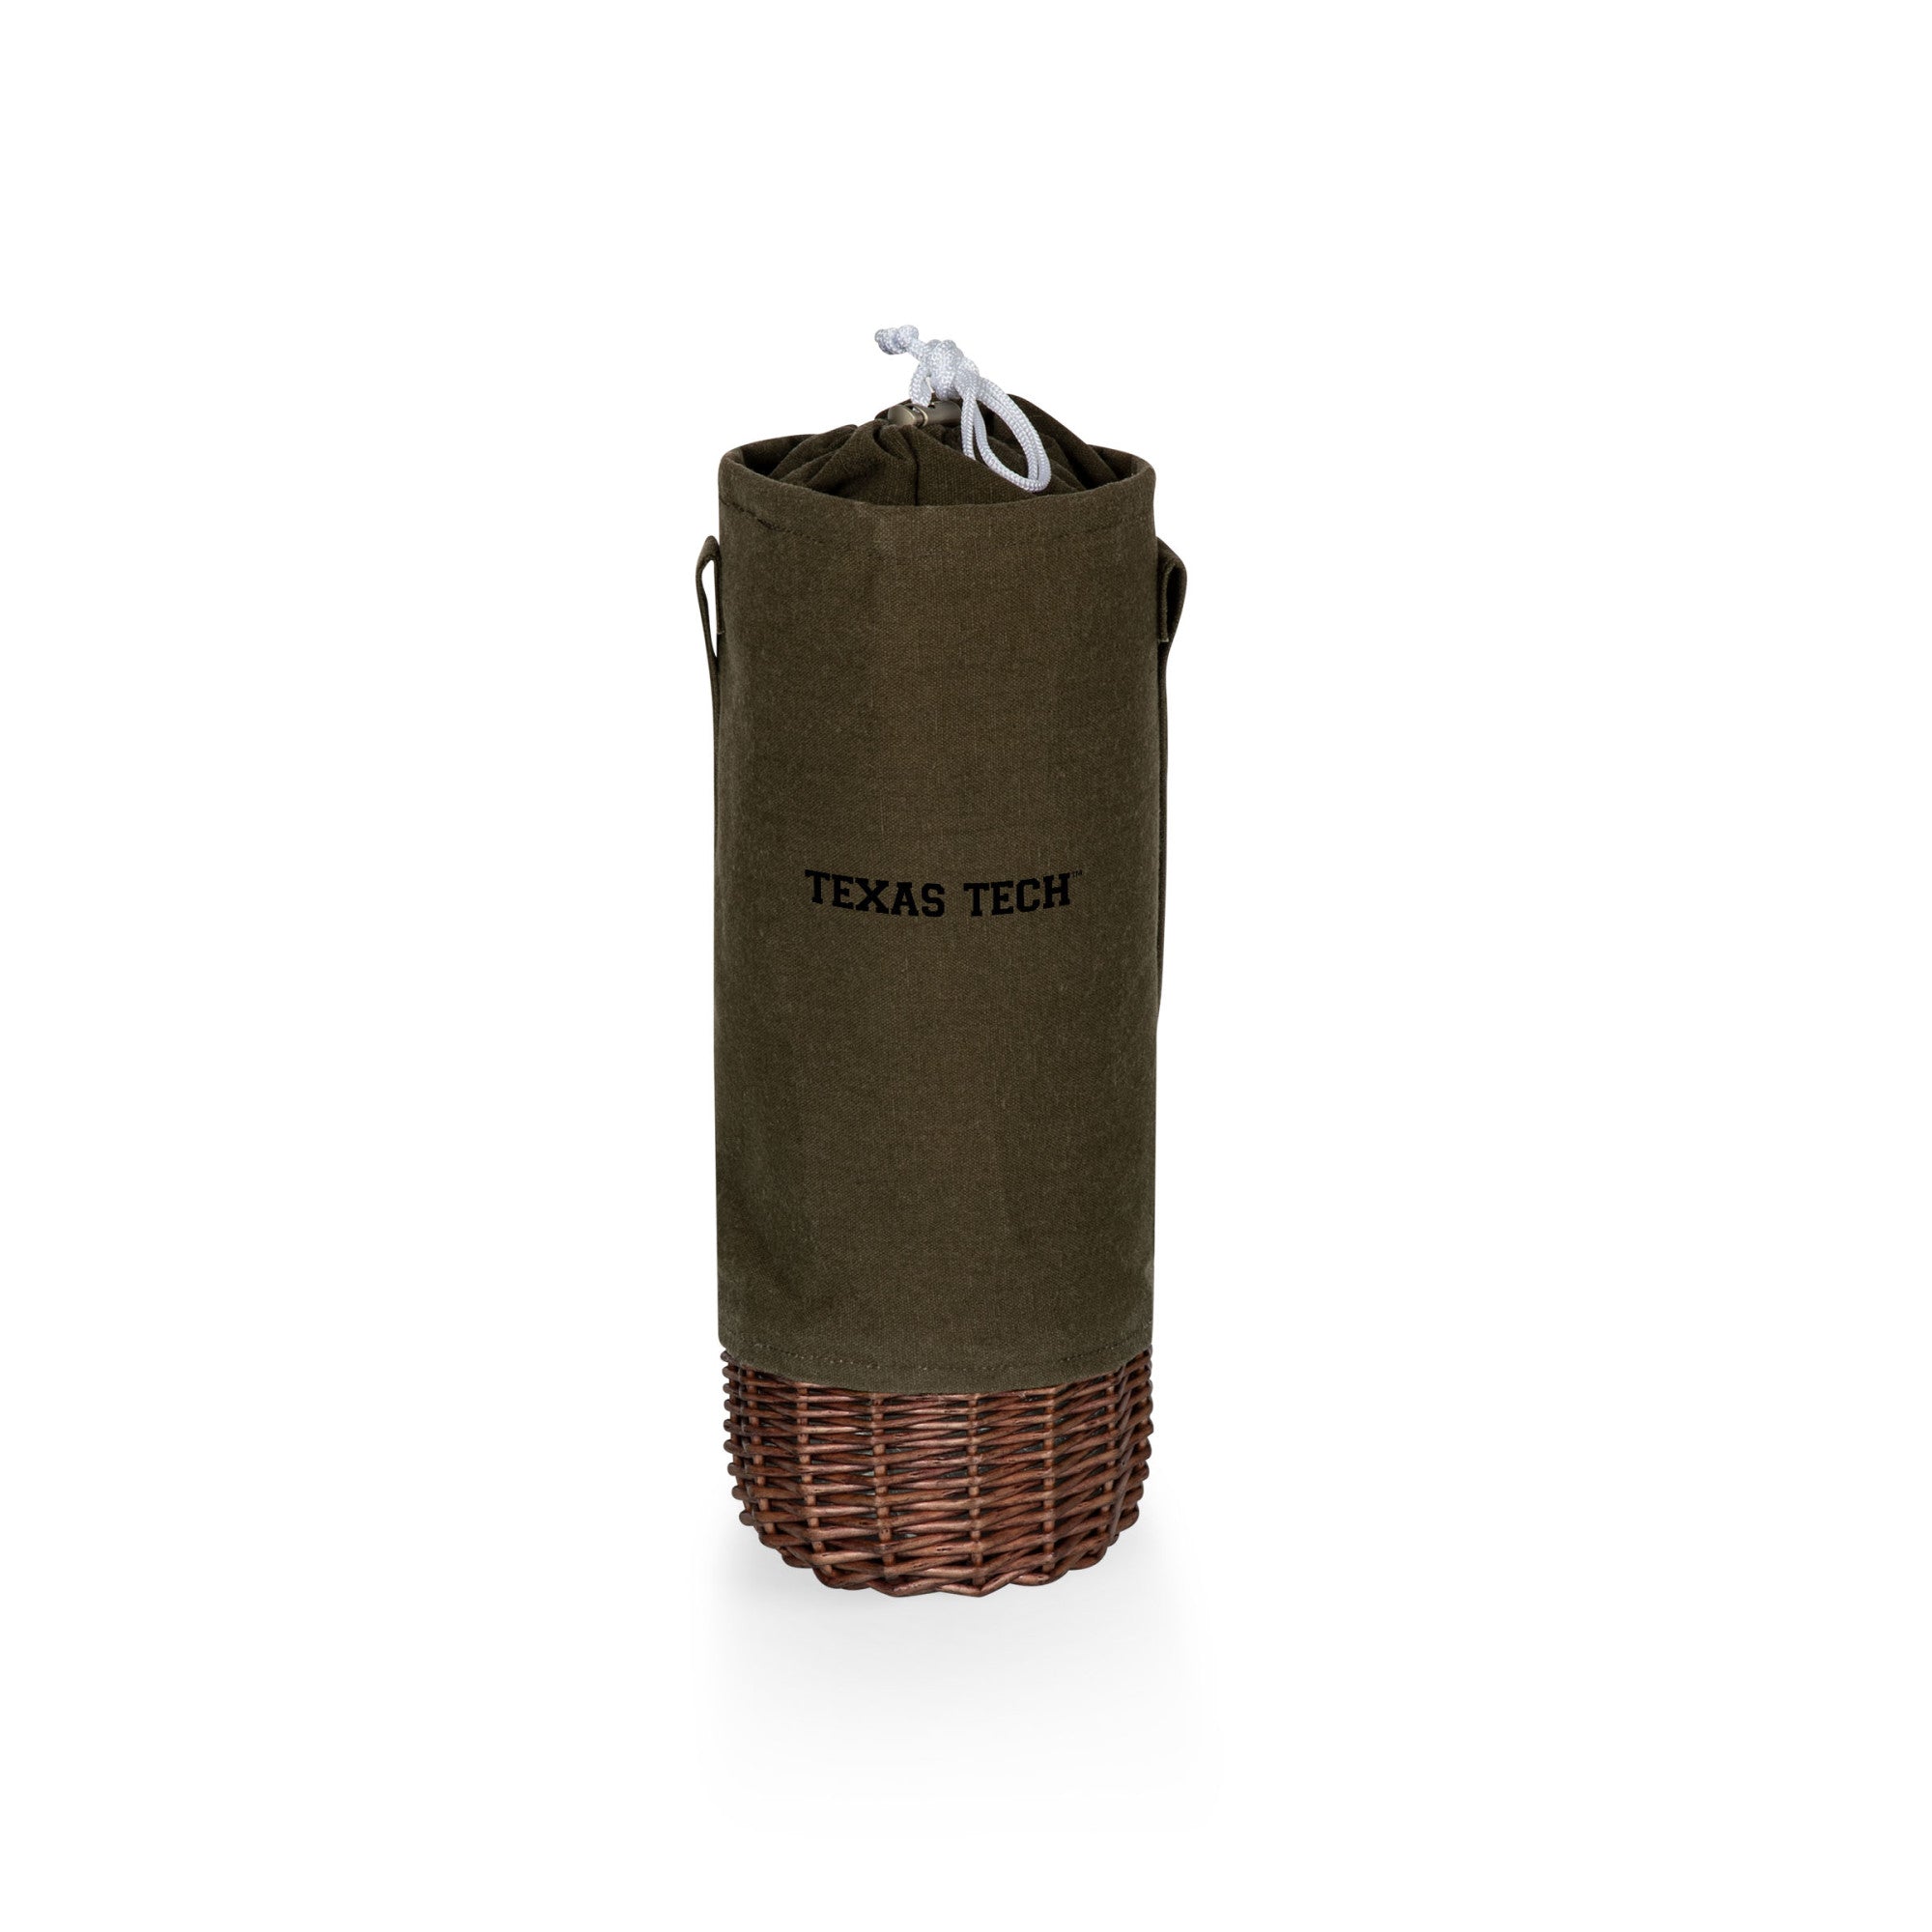 Texas Tech Red Raiders - Malbec Insulated Canvas and Willow Wine Bottle Basket